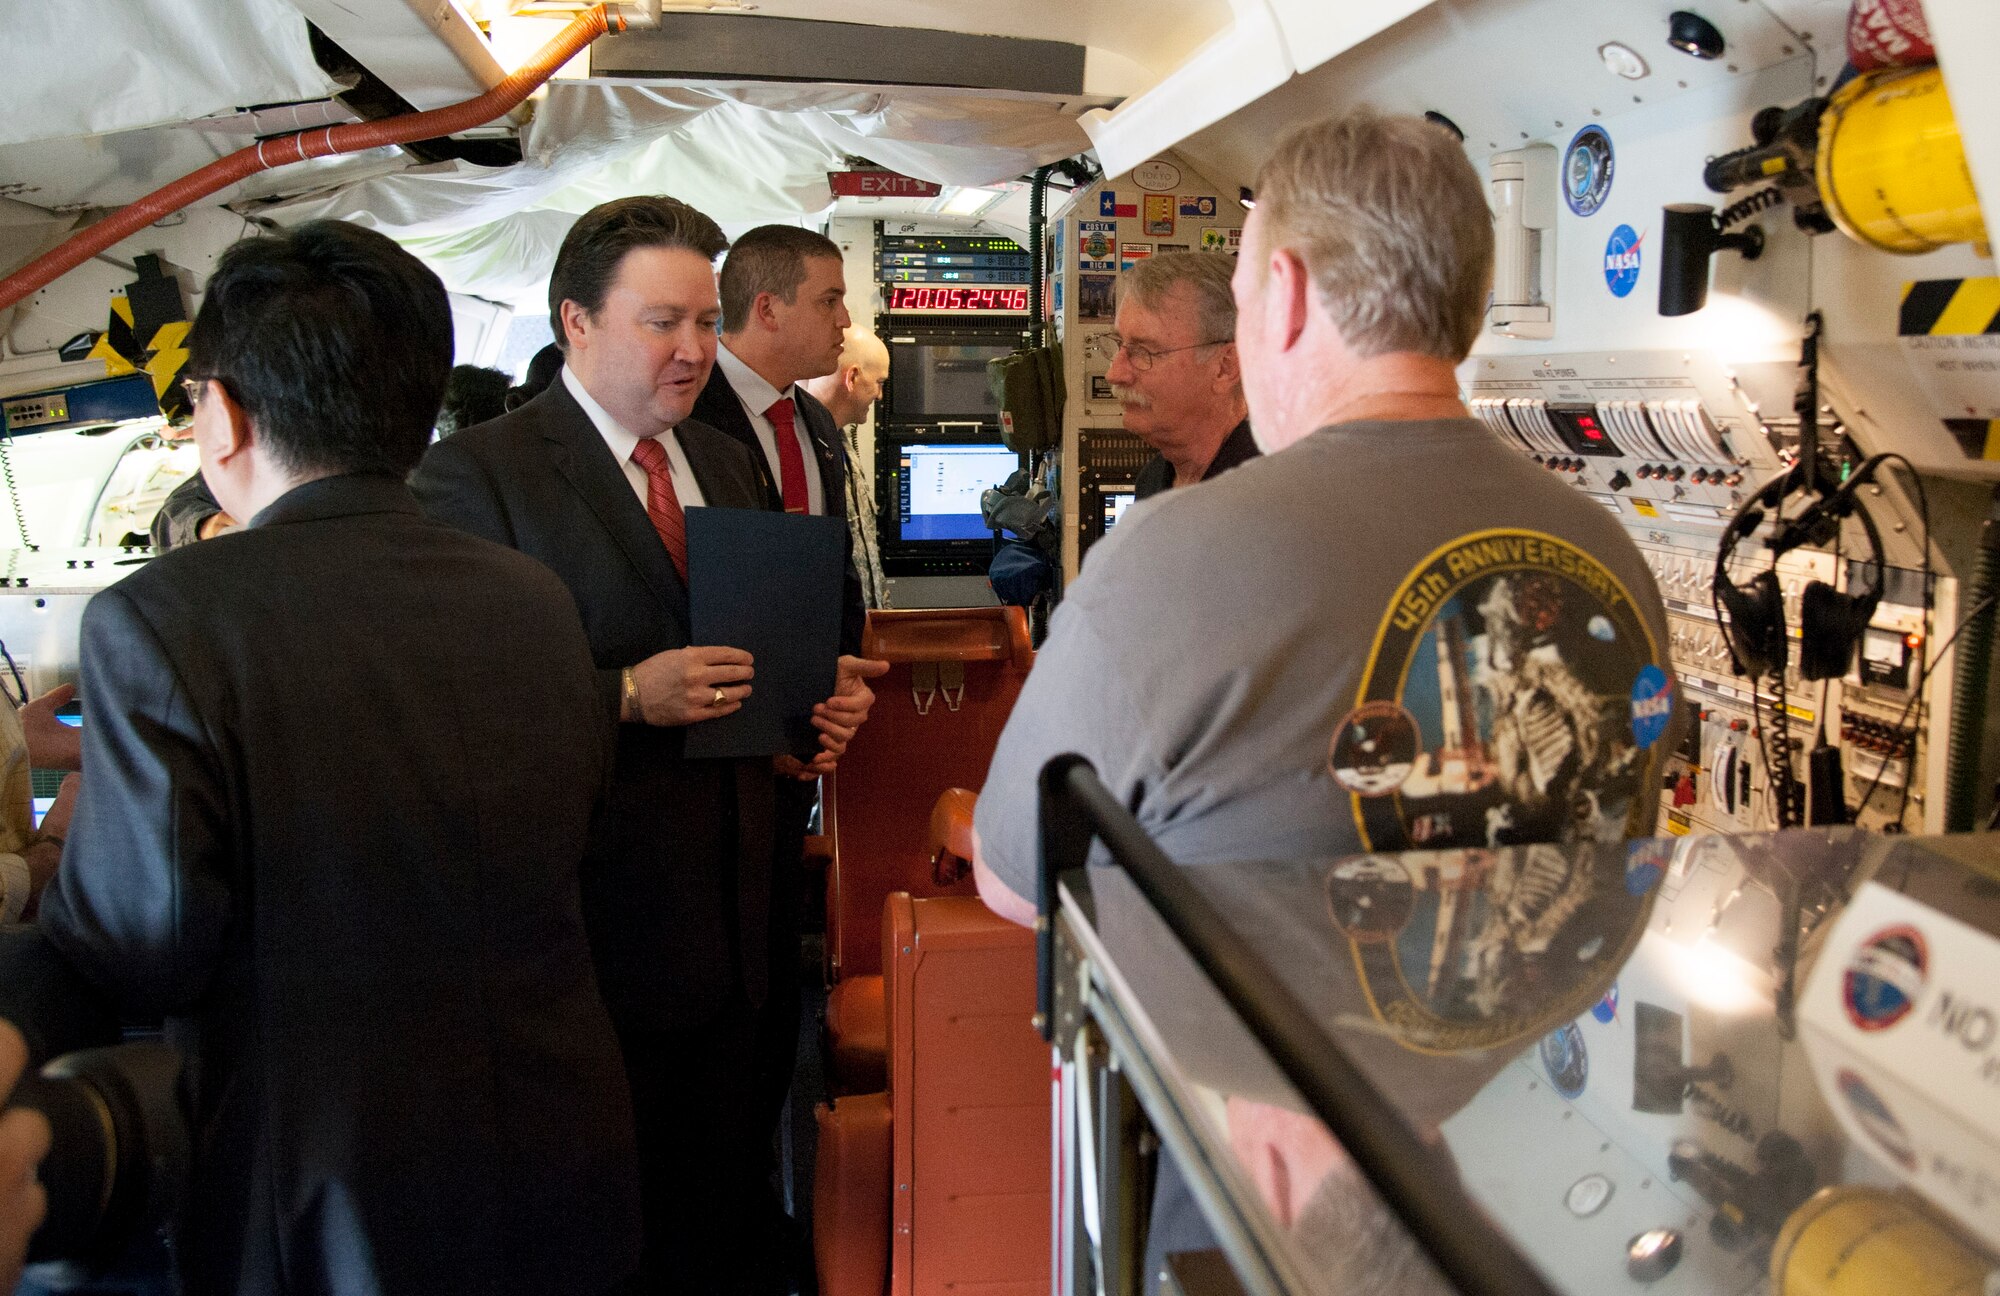 Marc Knapper, U.S. Embassy Seoul deputy chief of mission, receives a tour on board the NASA DC-8 that is part of the Korea United States-Air Quality (KORUS-AQ) Experiment at Osan Air Base, Republic of Korea, April 29, 2016. KORUS-AQ will deepen the understanding of the processes controlling air quality, improve knowledge of the challenges facing satellite observations of air quality and improve the ability of models to forecast and assess air quality conditions. (U.S. Air Force photo by Staff Sgt. Jonathan Steffen/Released)